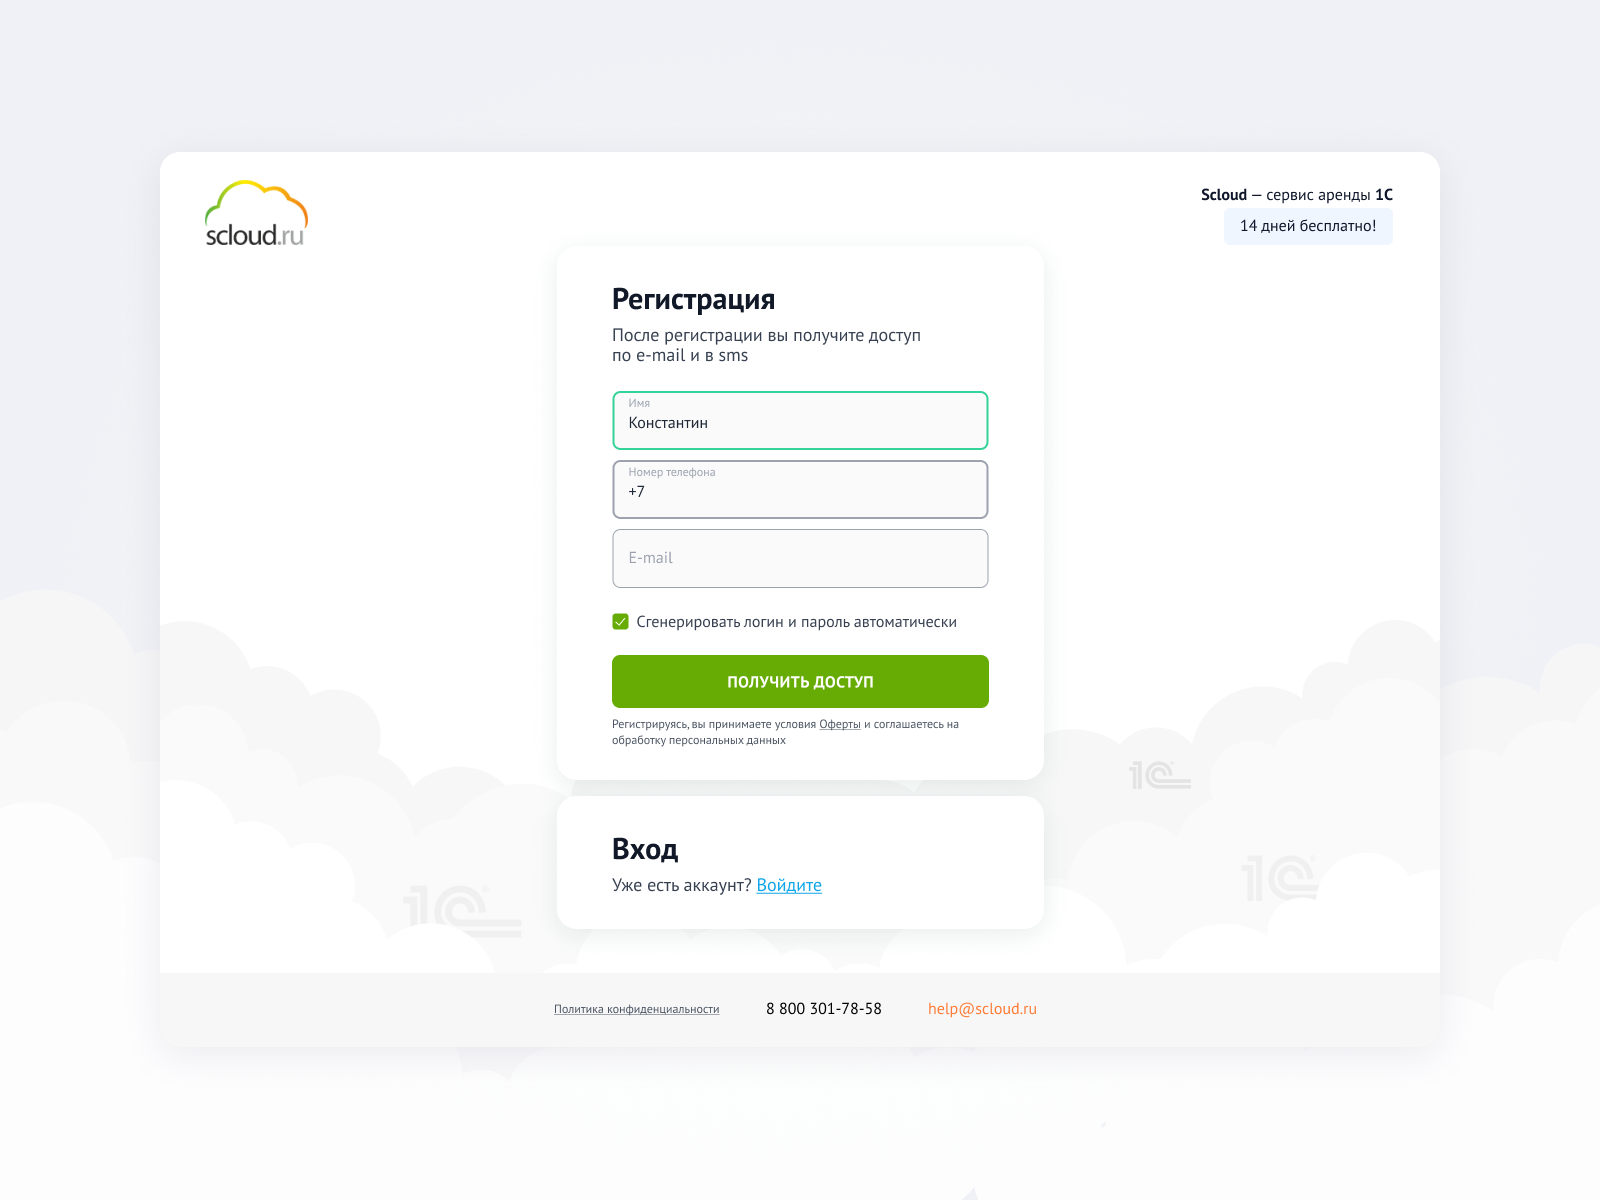 Registration form by Di ana on Dribbble